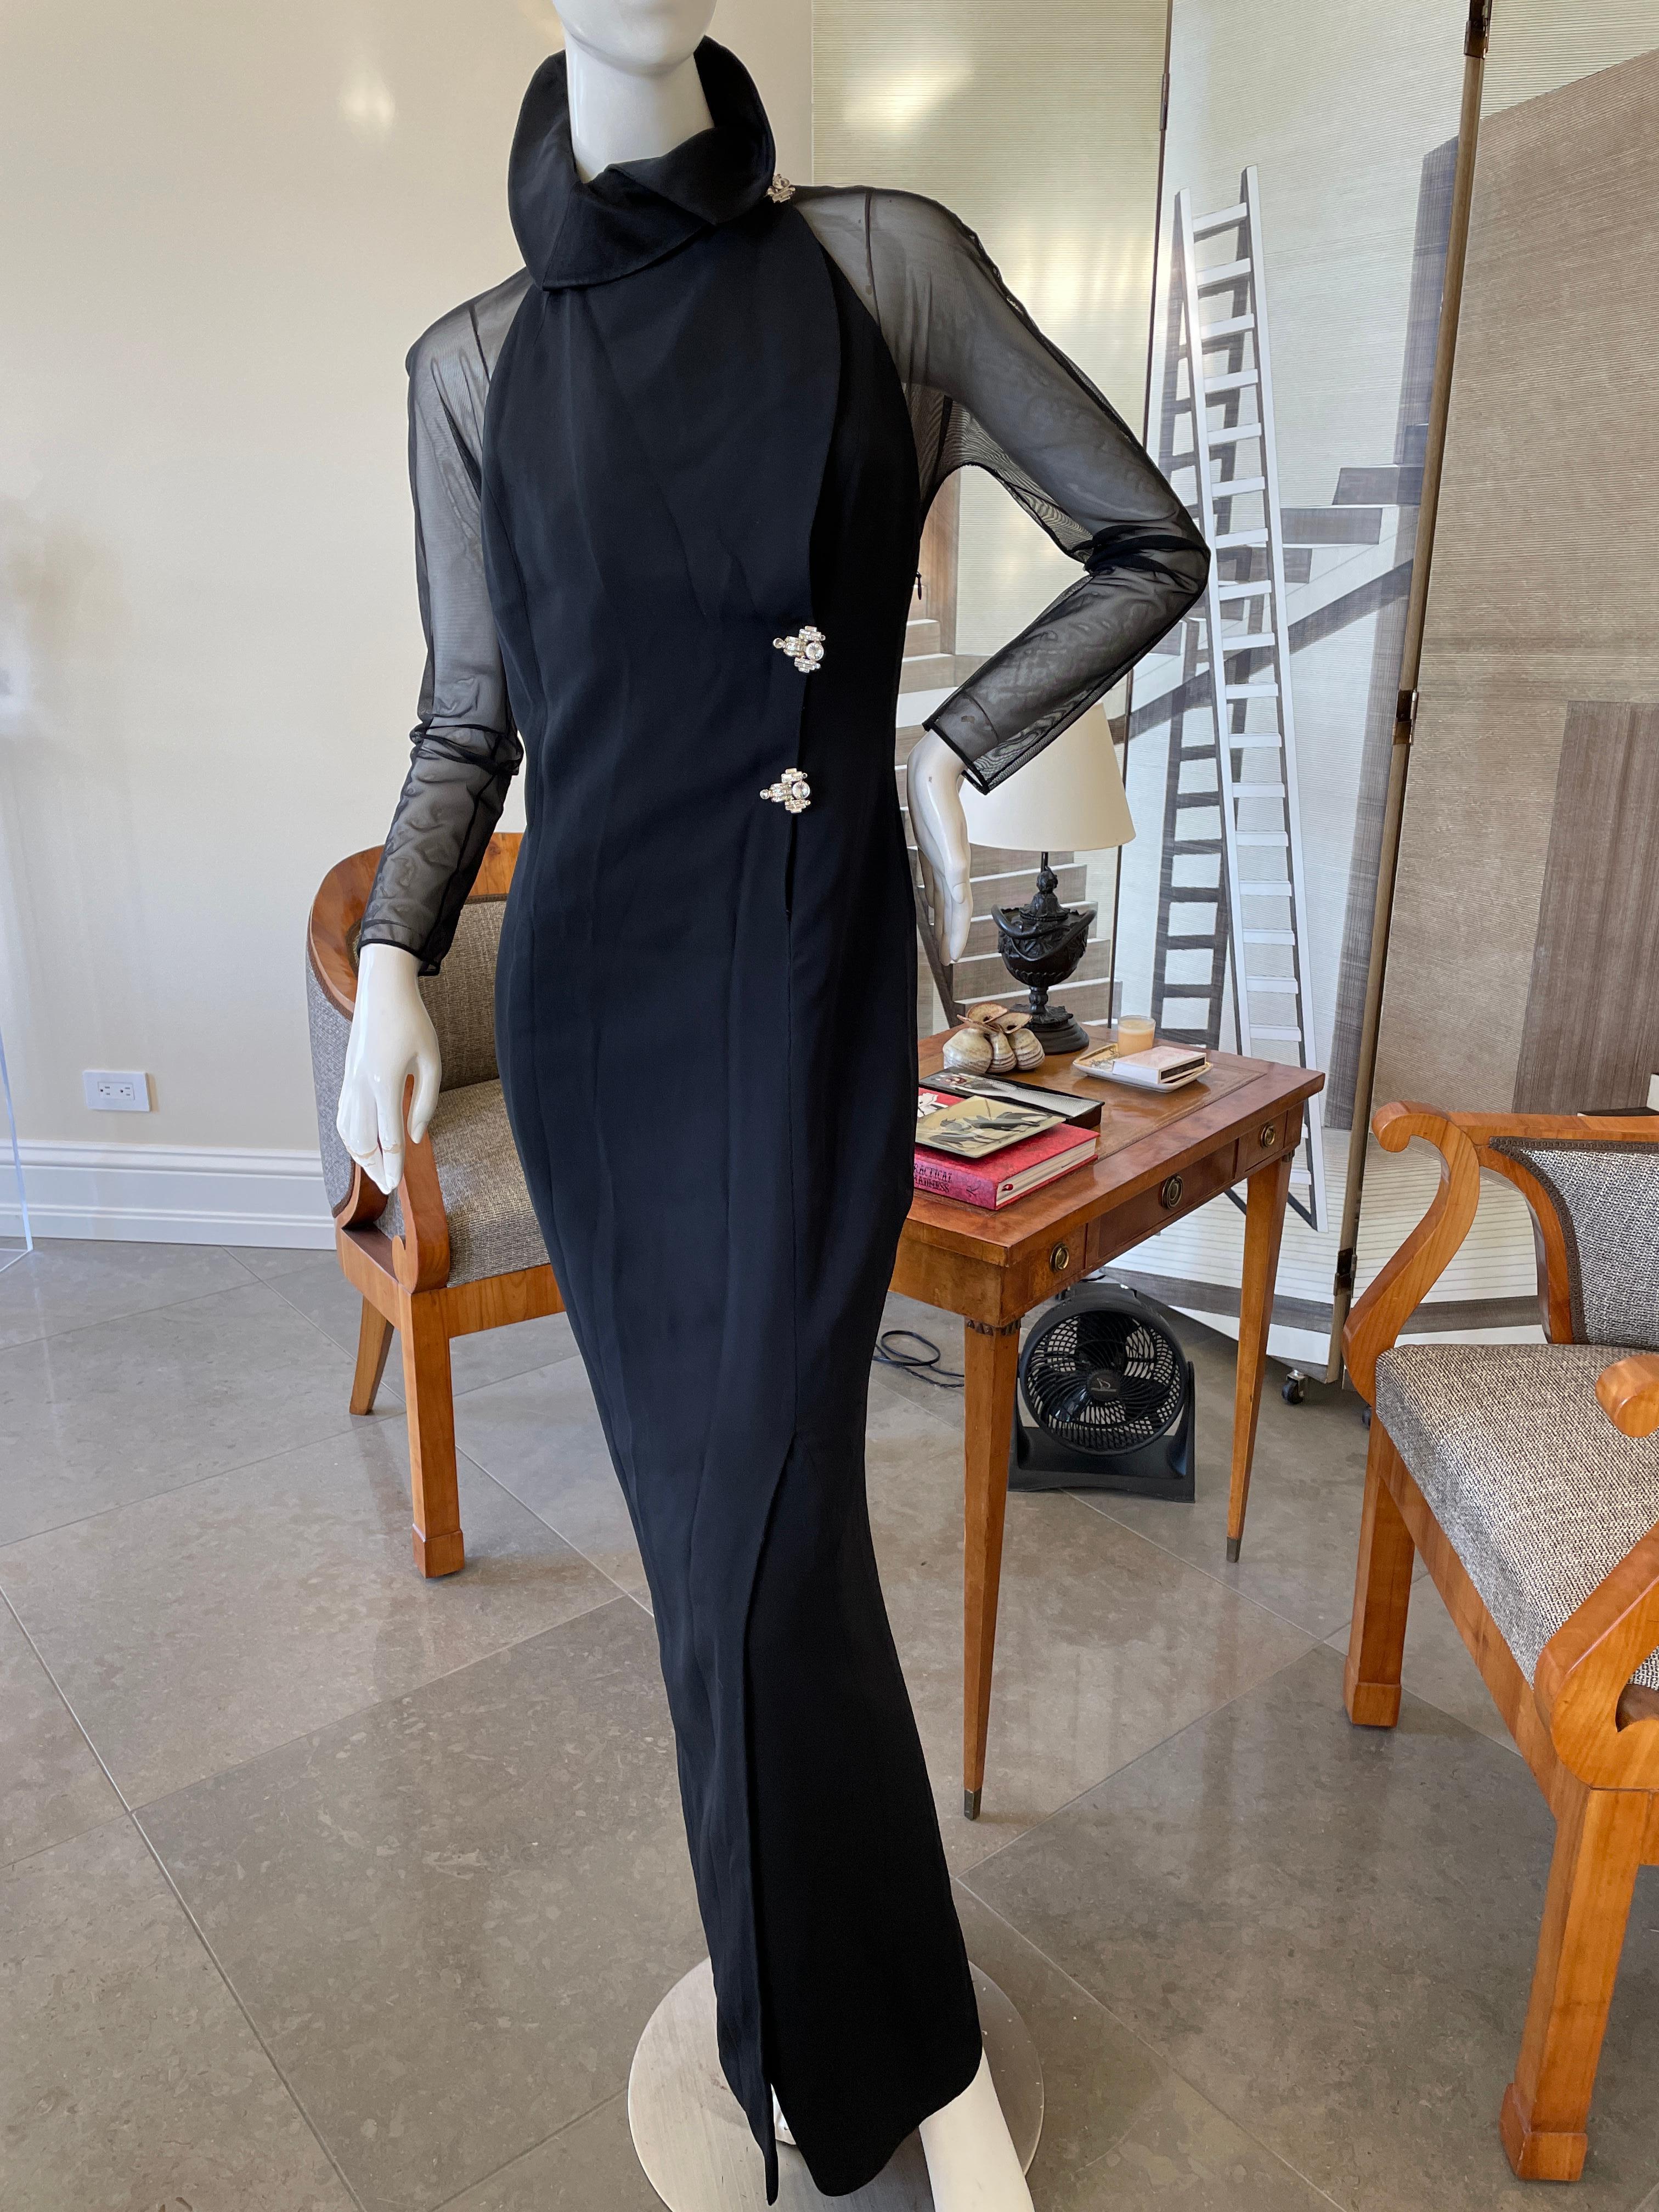  Gianfranco Ferre Vintage Sheer Black Evening Dress with Sexy Back In Good Condition For Sale In Cloverdale, CA